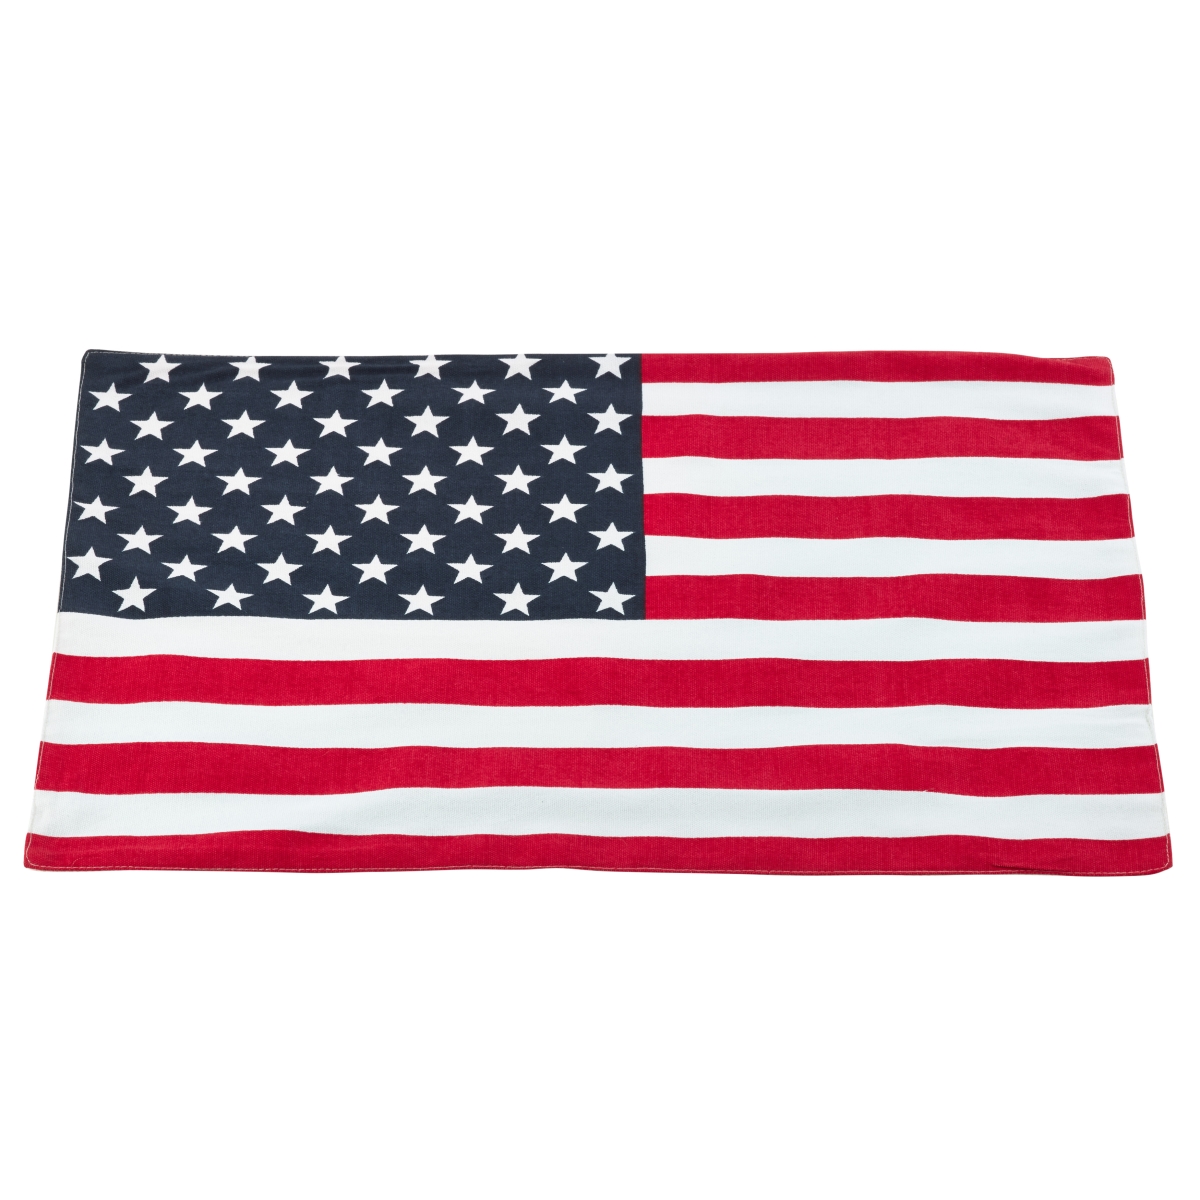 Picture of SARO 0704.M1420B 14 x 20 in. Star Spangled American Flag Design Placemats  Multi Color - Set of 4